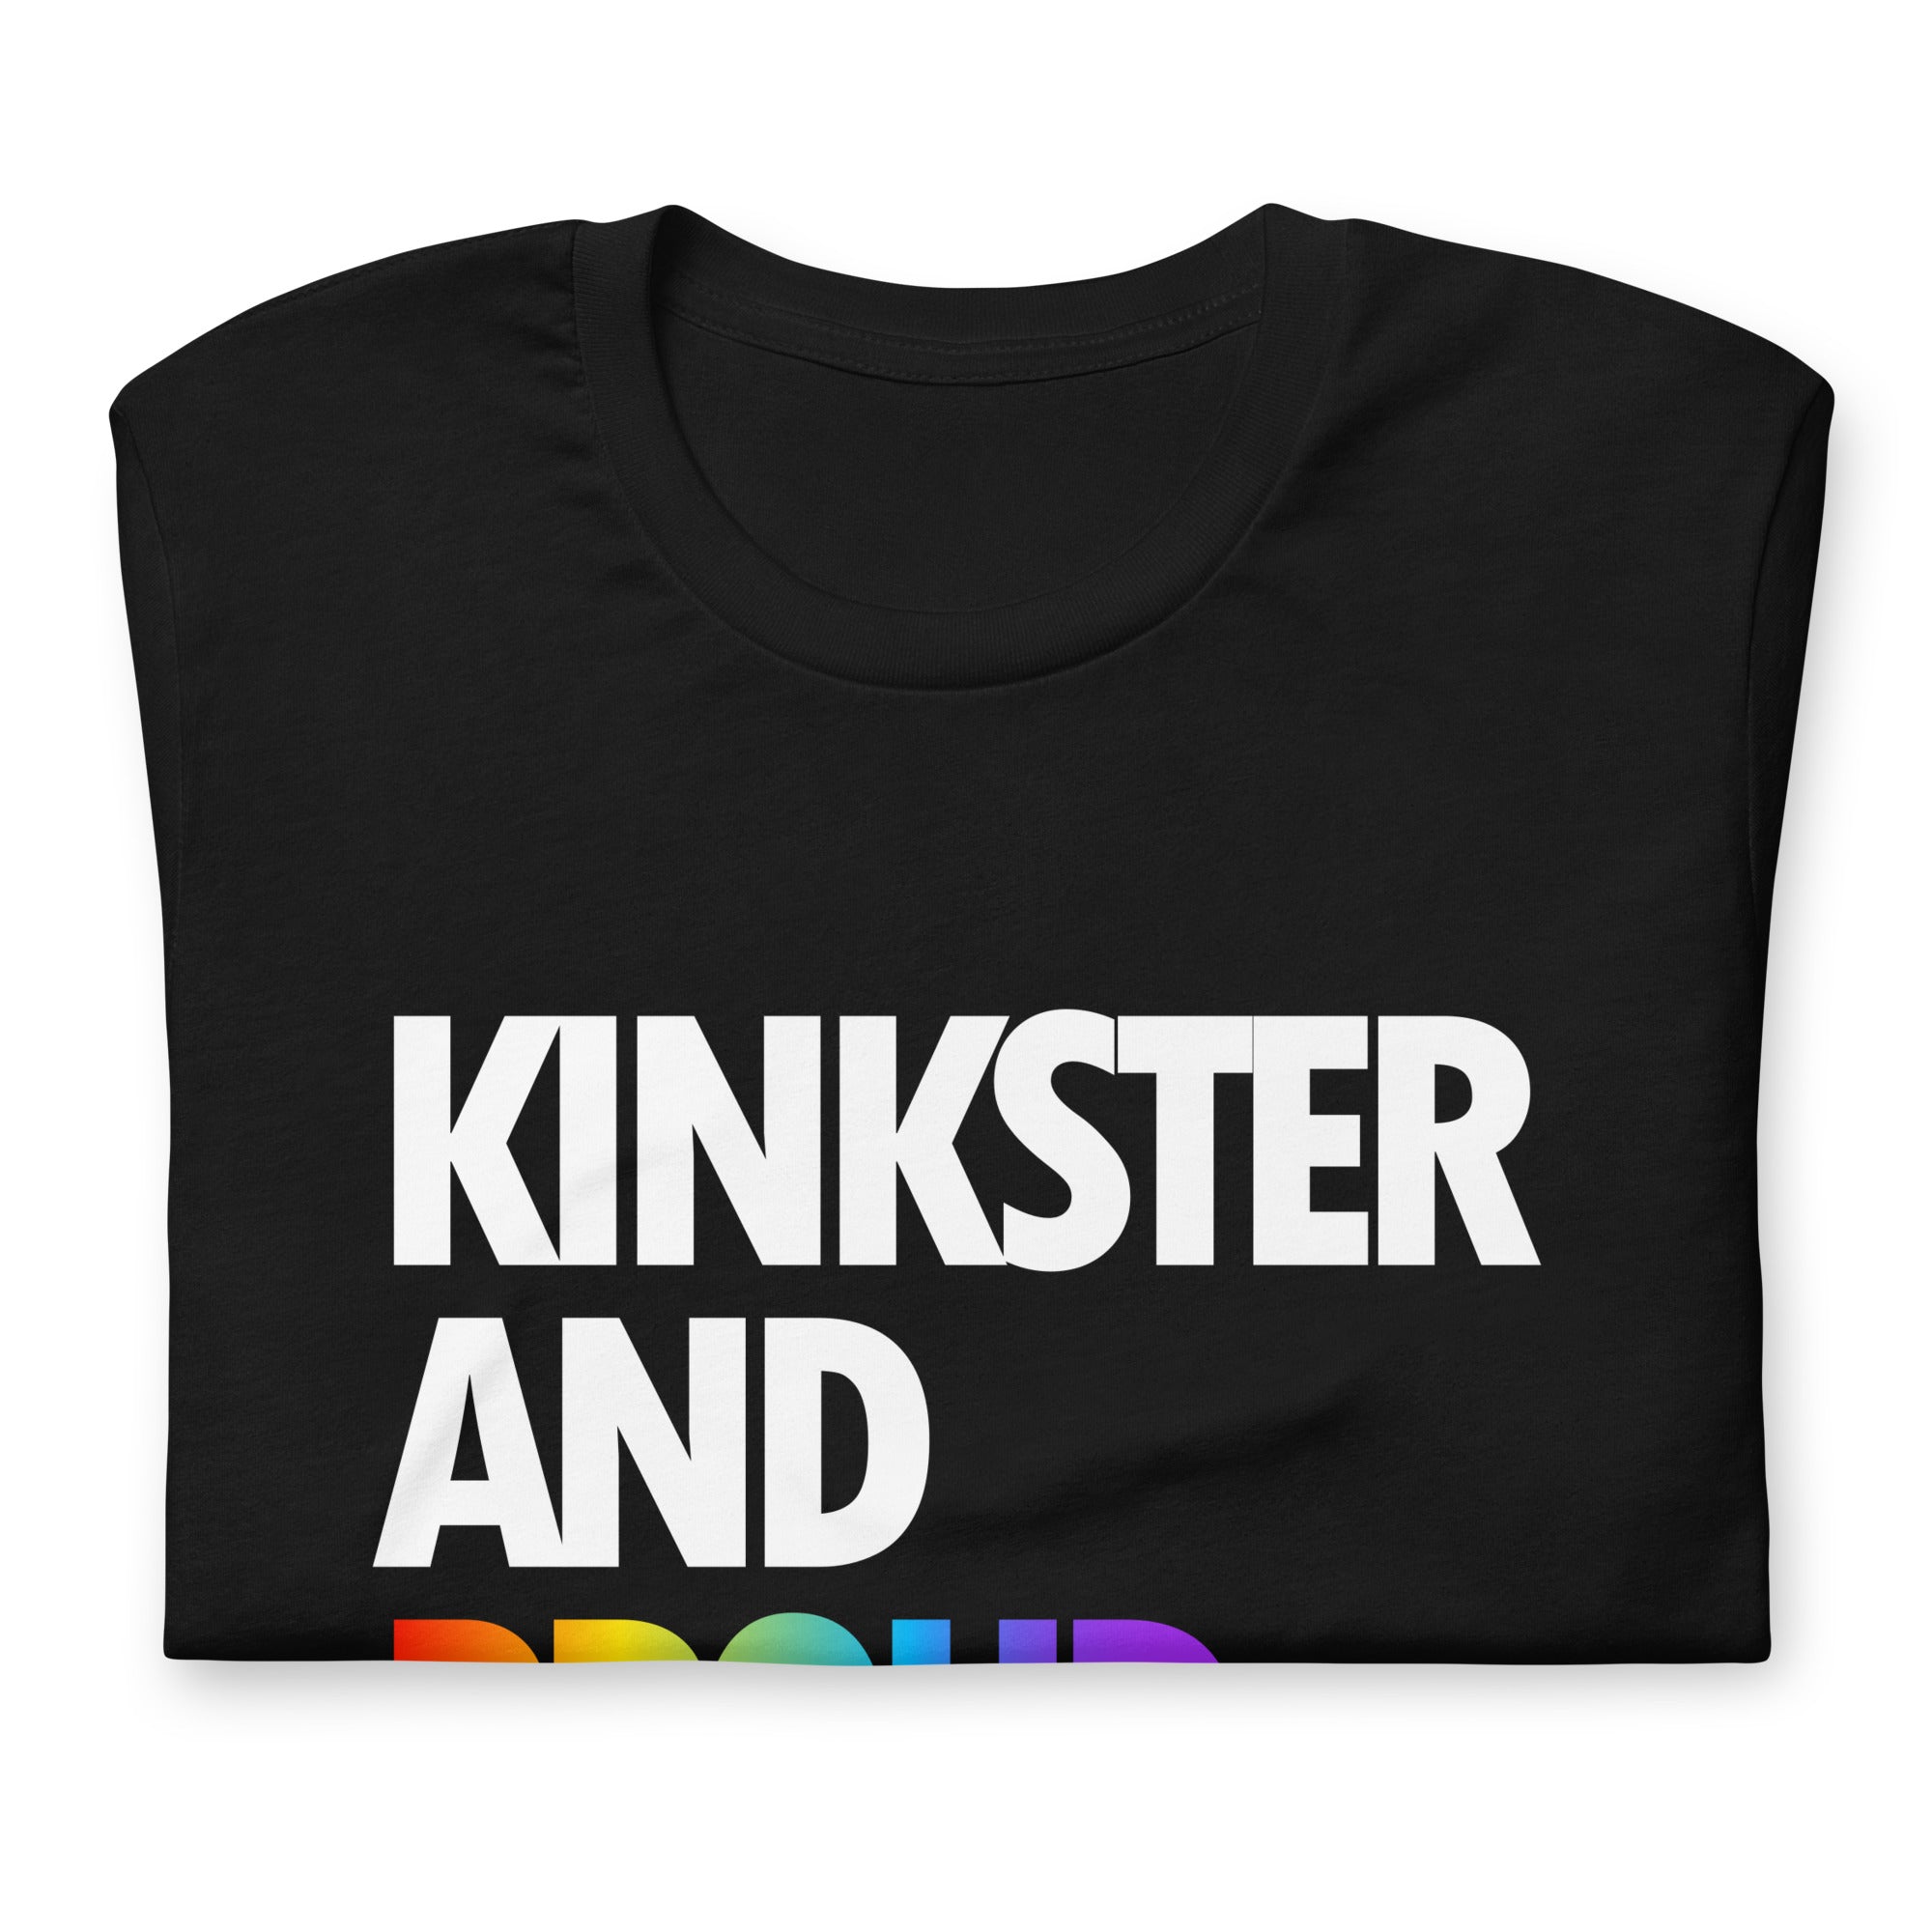 Kinkster and Proud / T-Shirt